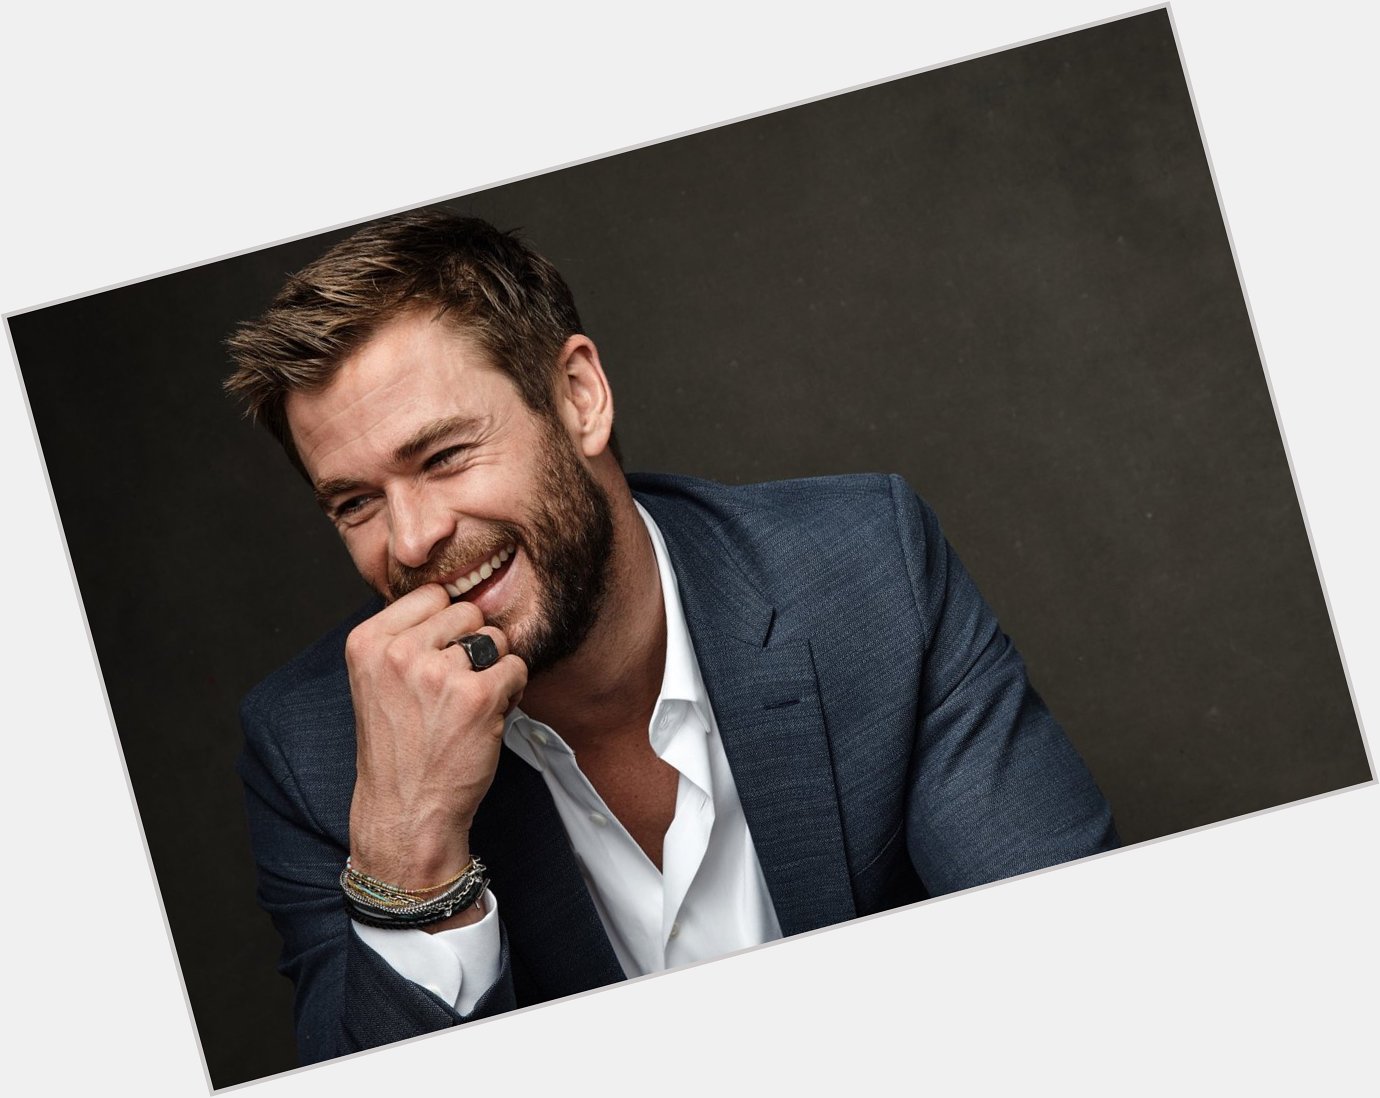 Happy Birthday to the talented and handsome Chris Hemsworth. The \Thor\ actor turns 34 today! 